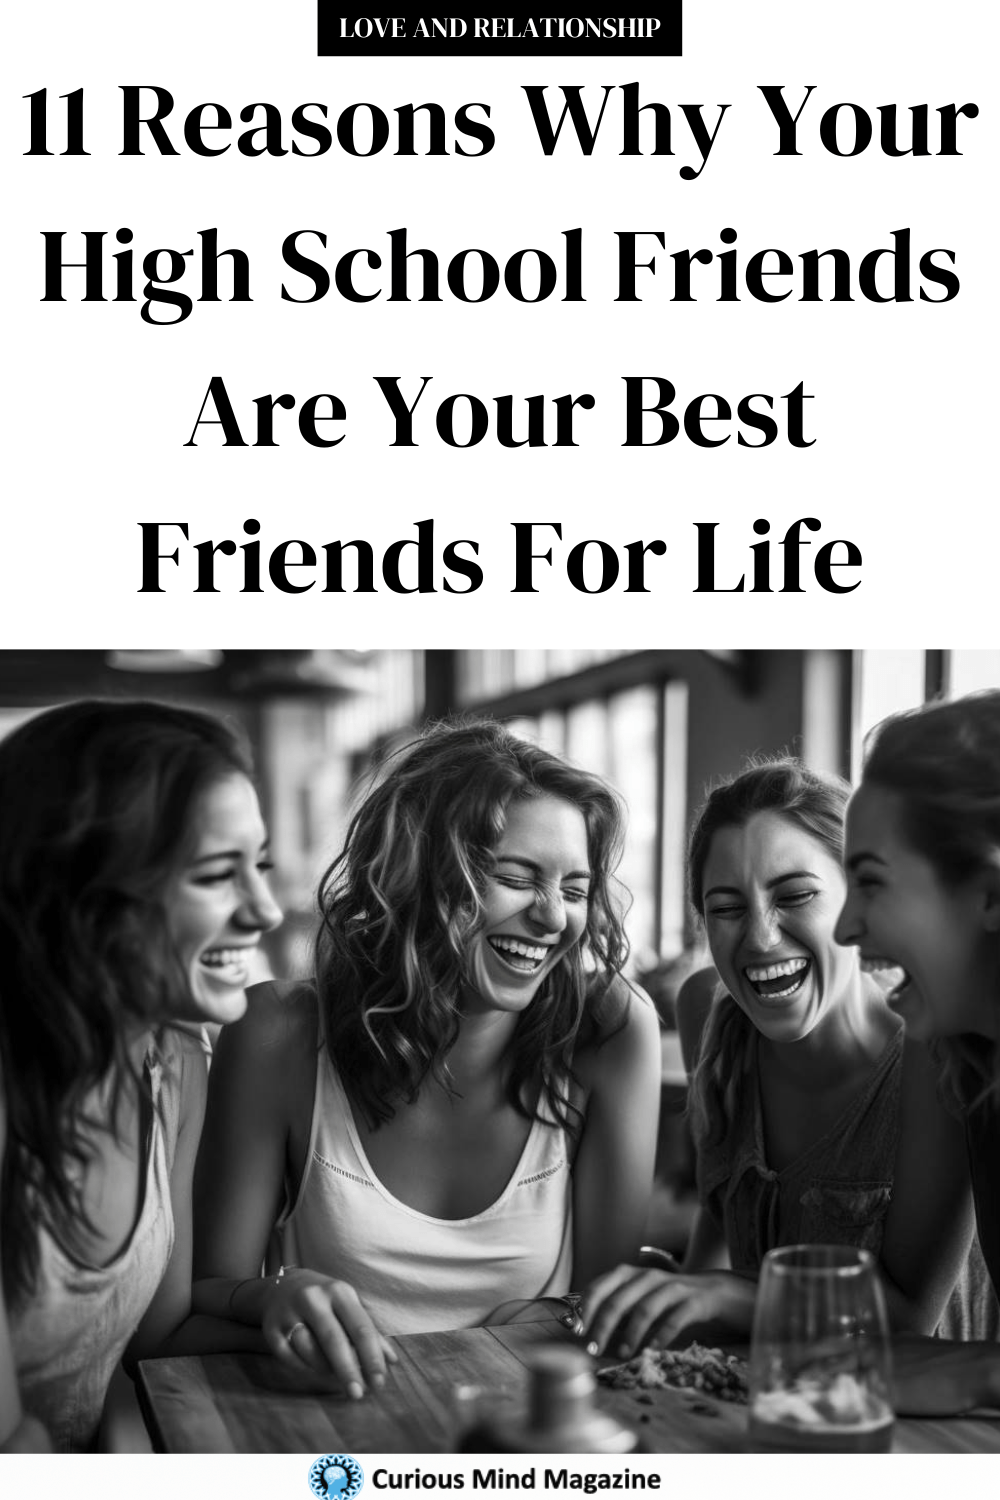 11 Reasons Why Your High School Friends Are Your Best Friends For Life